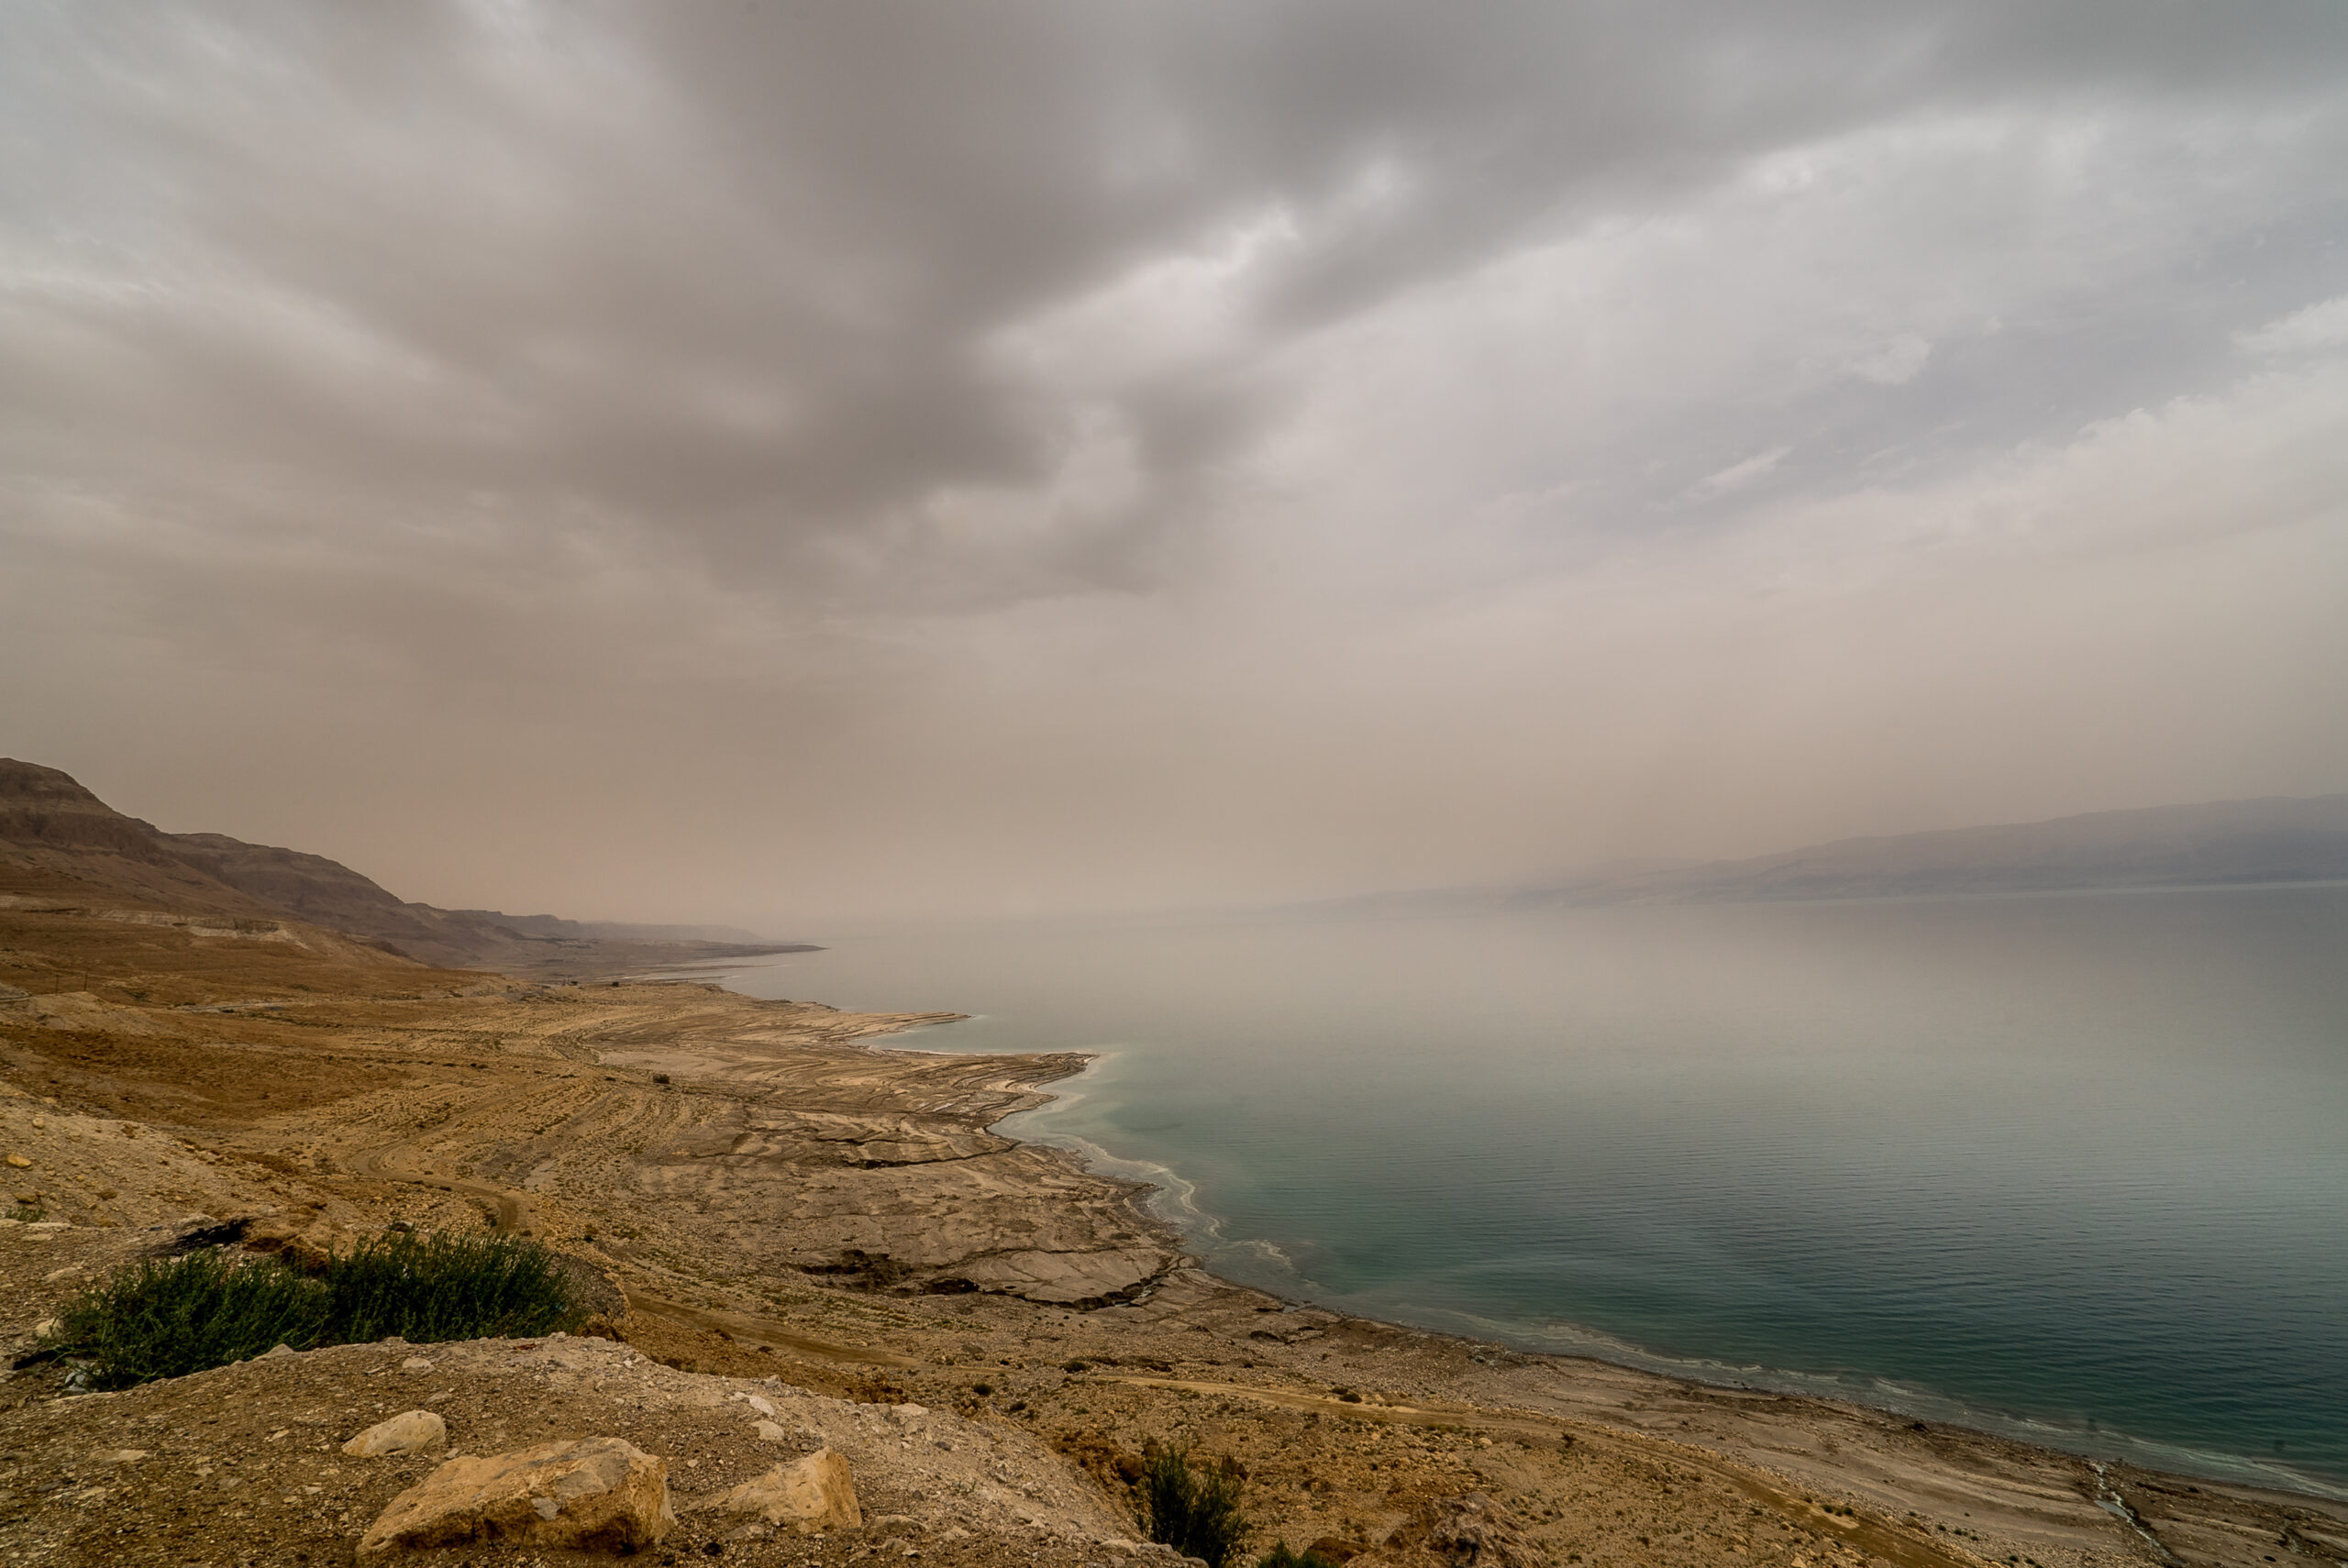 The surface and shores of the Dead Sea are 423 metres (1,388 ft) below sea level, making it Earth’s lowest elevation on land.